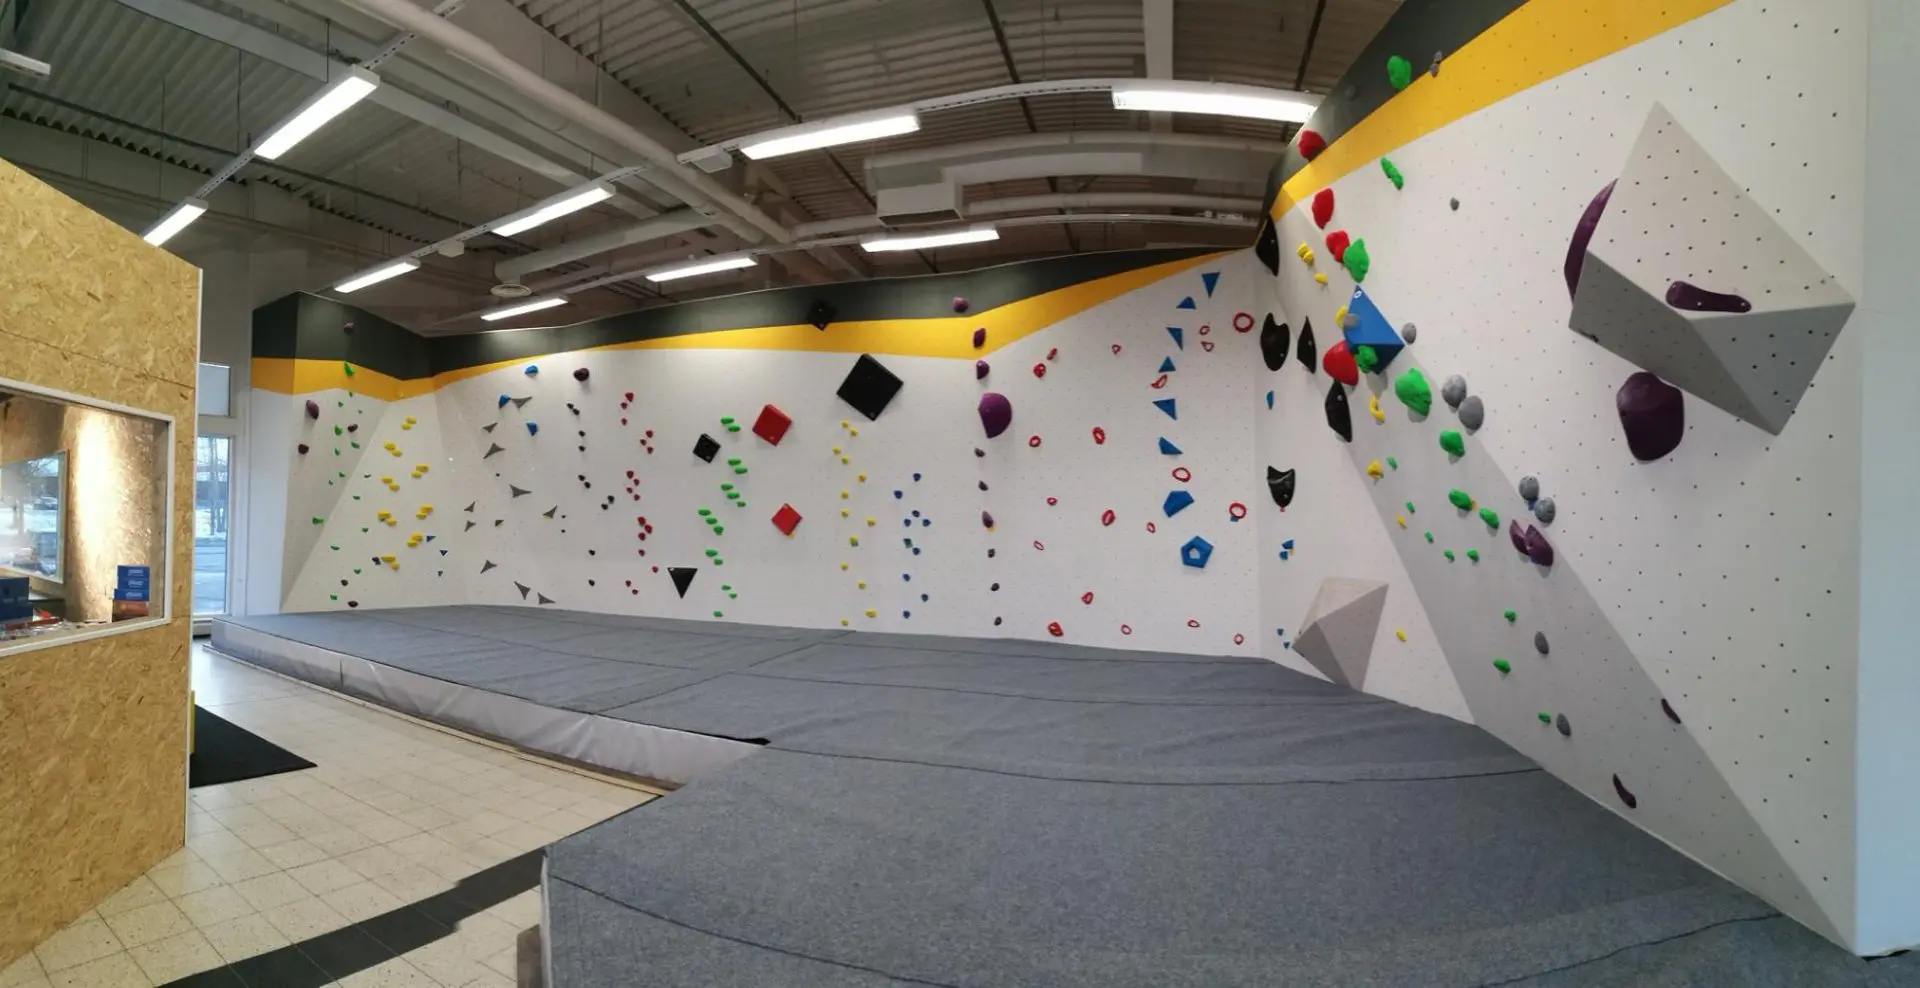 A large indoor climbing wall with many different colors.